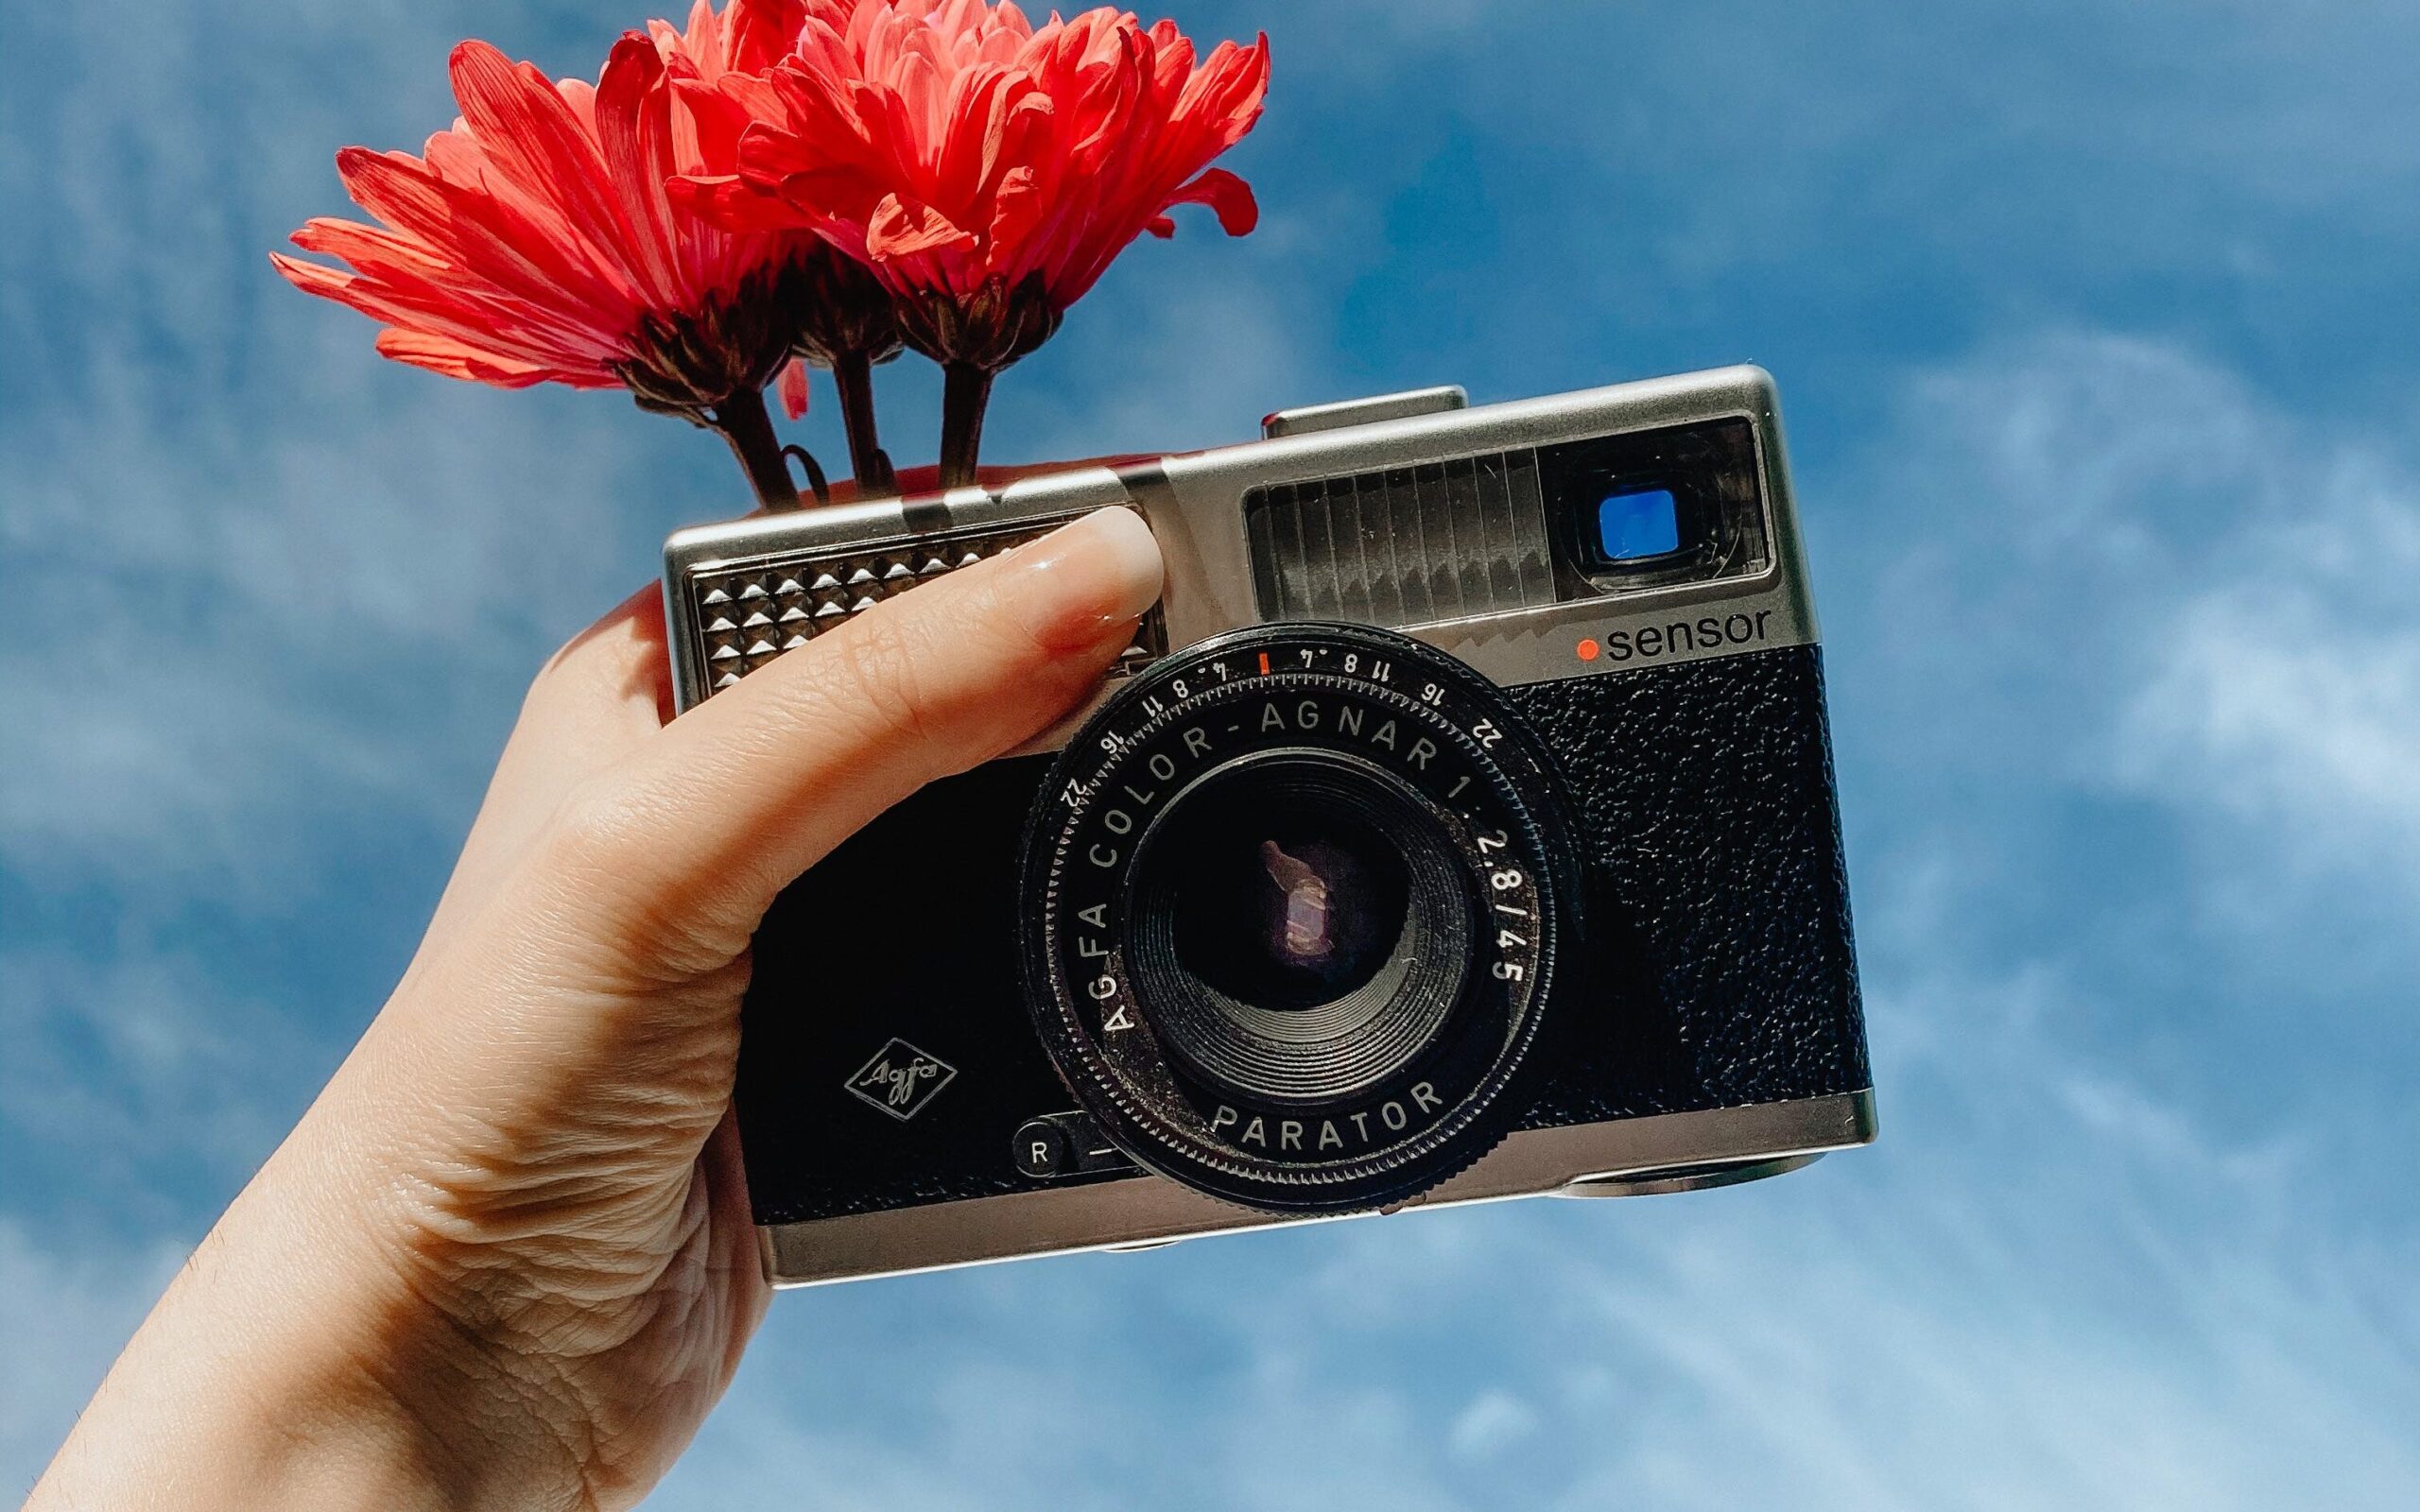 holding vintage camera with a red carnation flower in the sky reminding of nostalgia 
